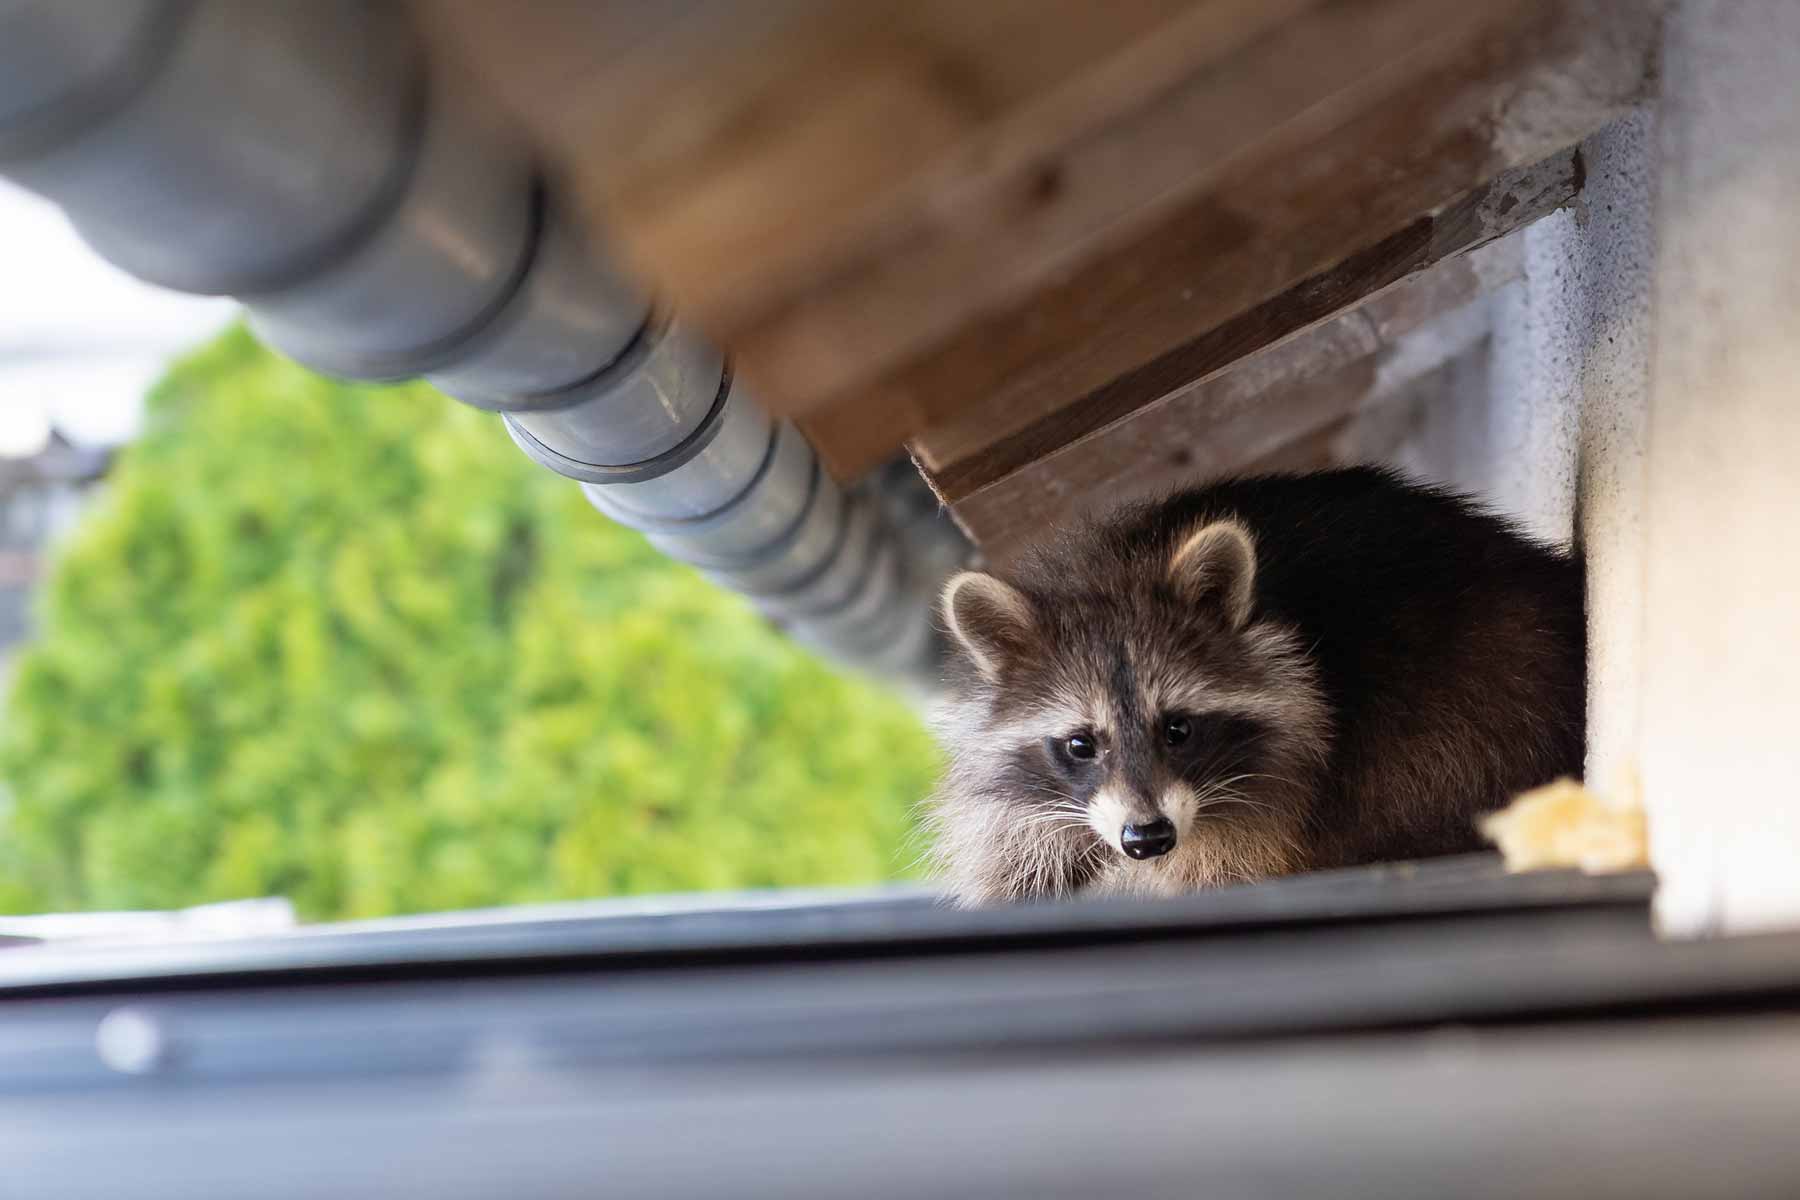 Surprising Cost Of Removing Raccoon Family From Chimney And Cleanup Revealed!